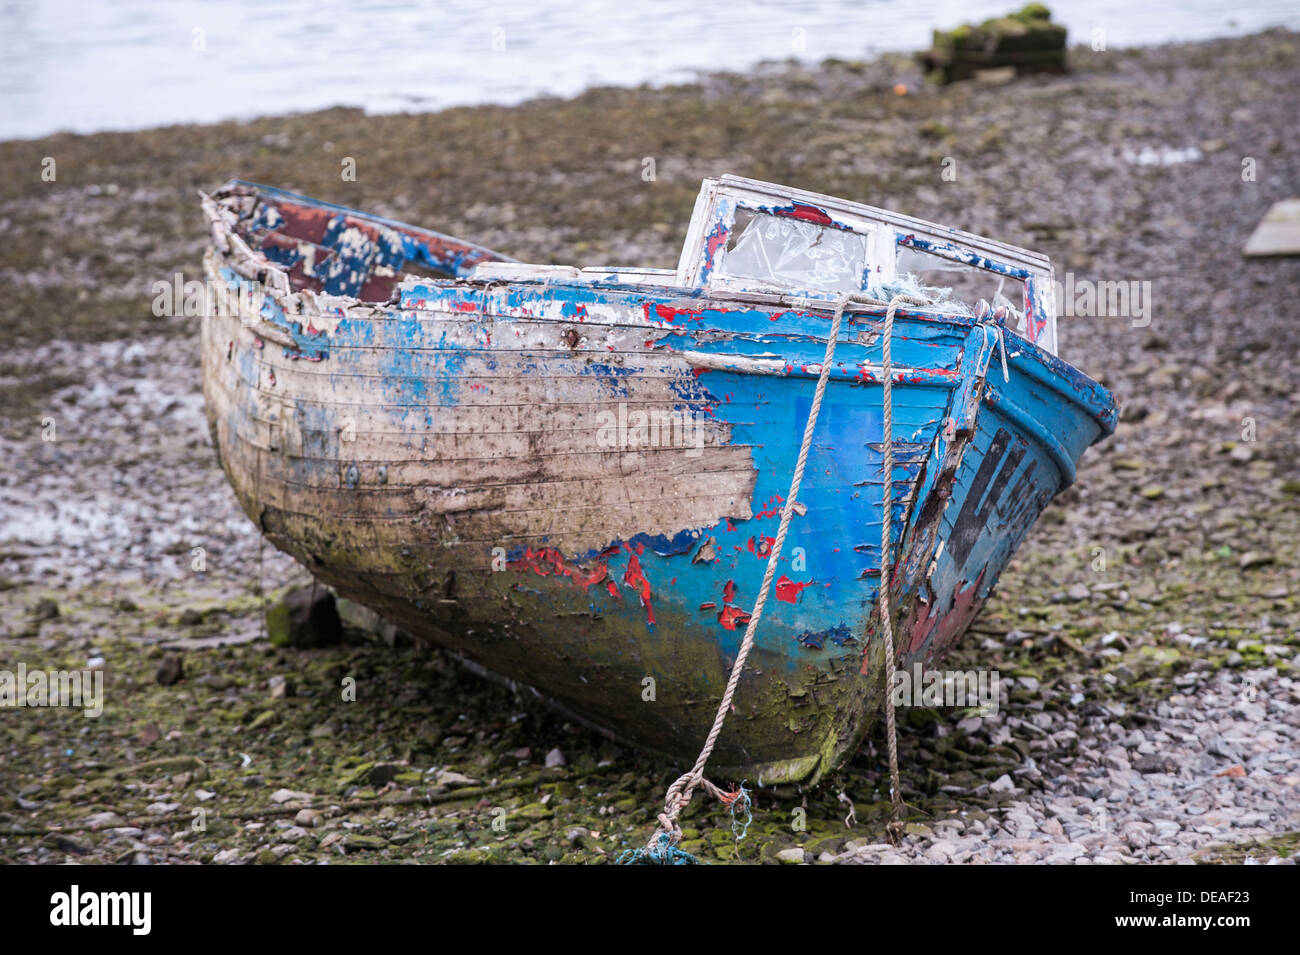 Old fishing boat lying on the gravel bed of a river, County Galway, Republic of Ireland, Europe Stock Photo